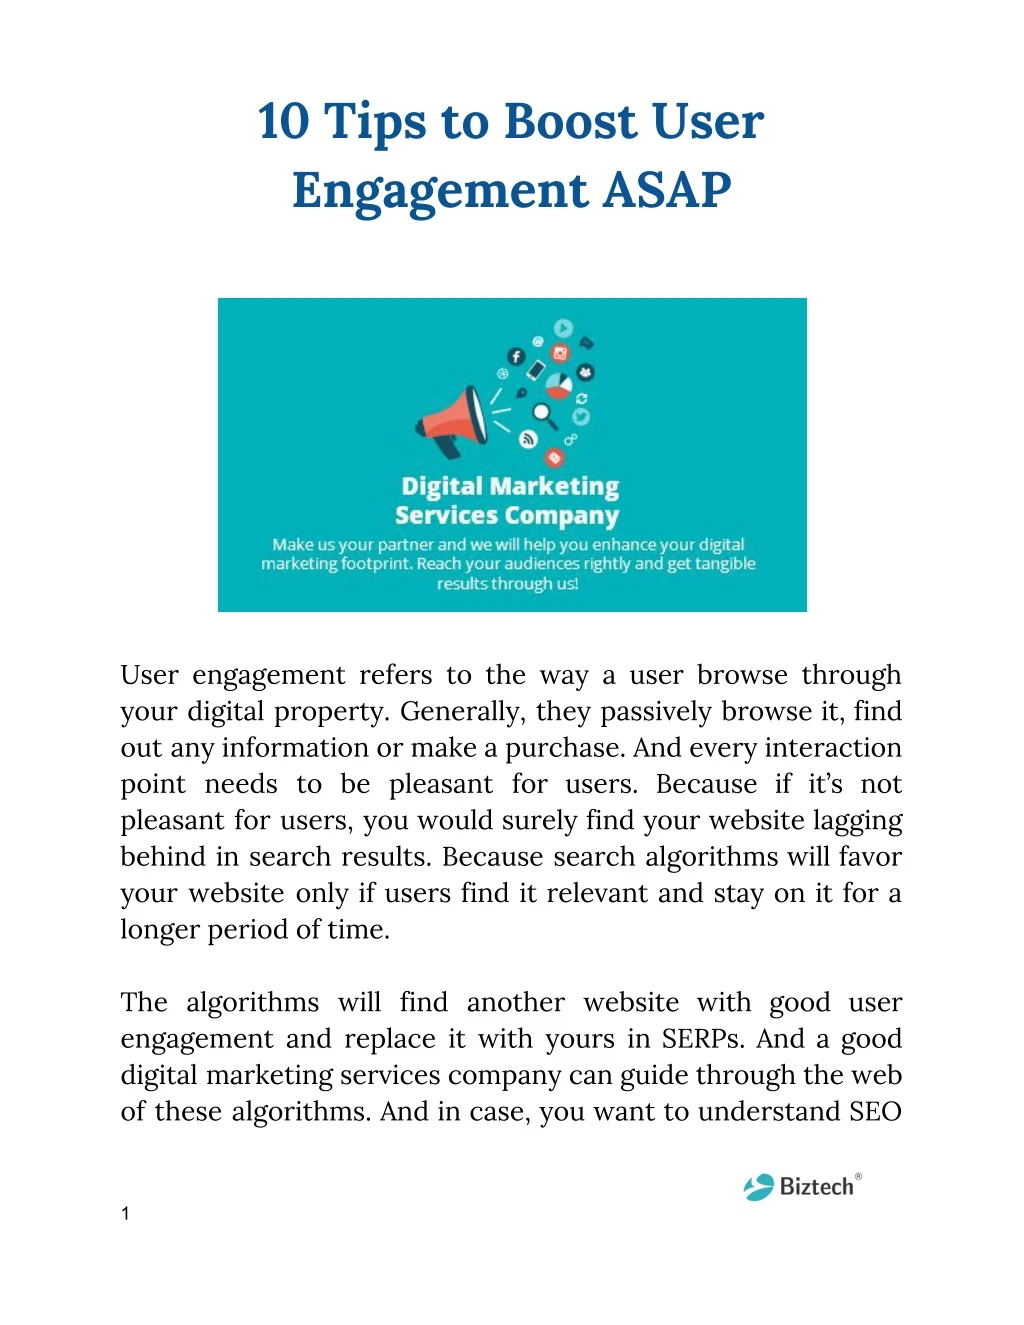 10 tips to boost user engagement asap